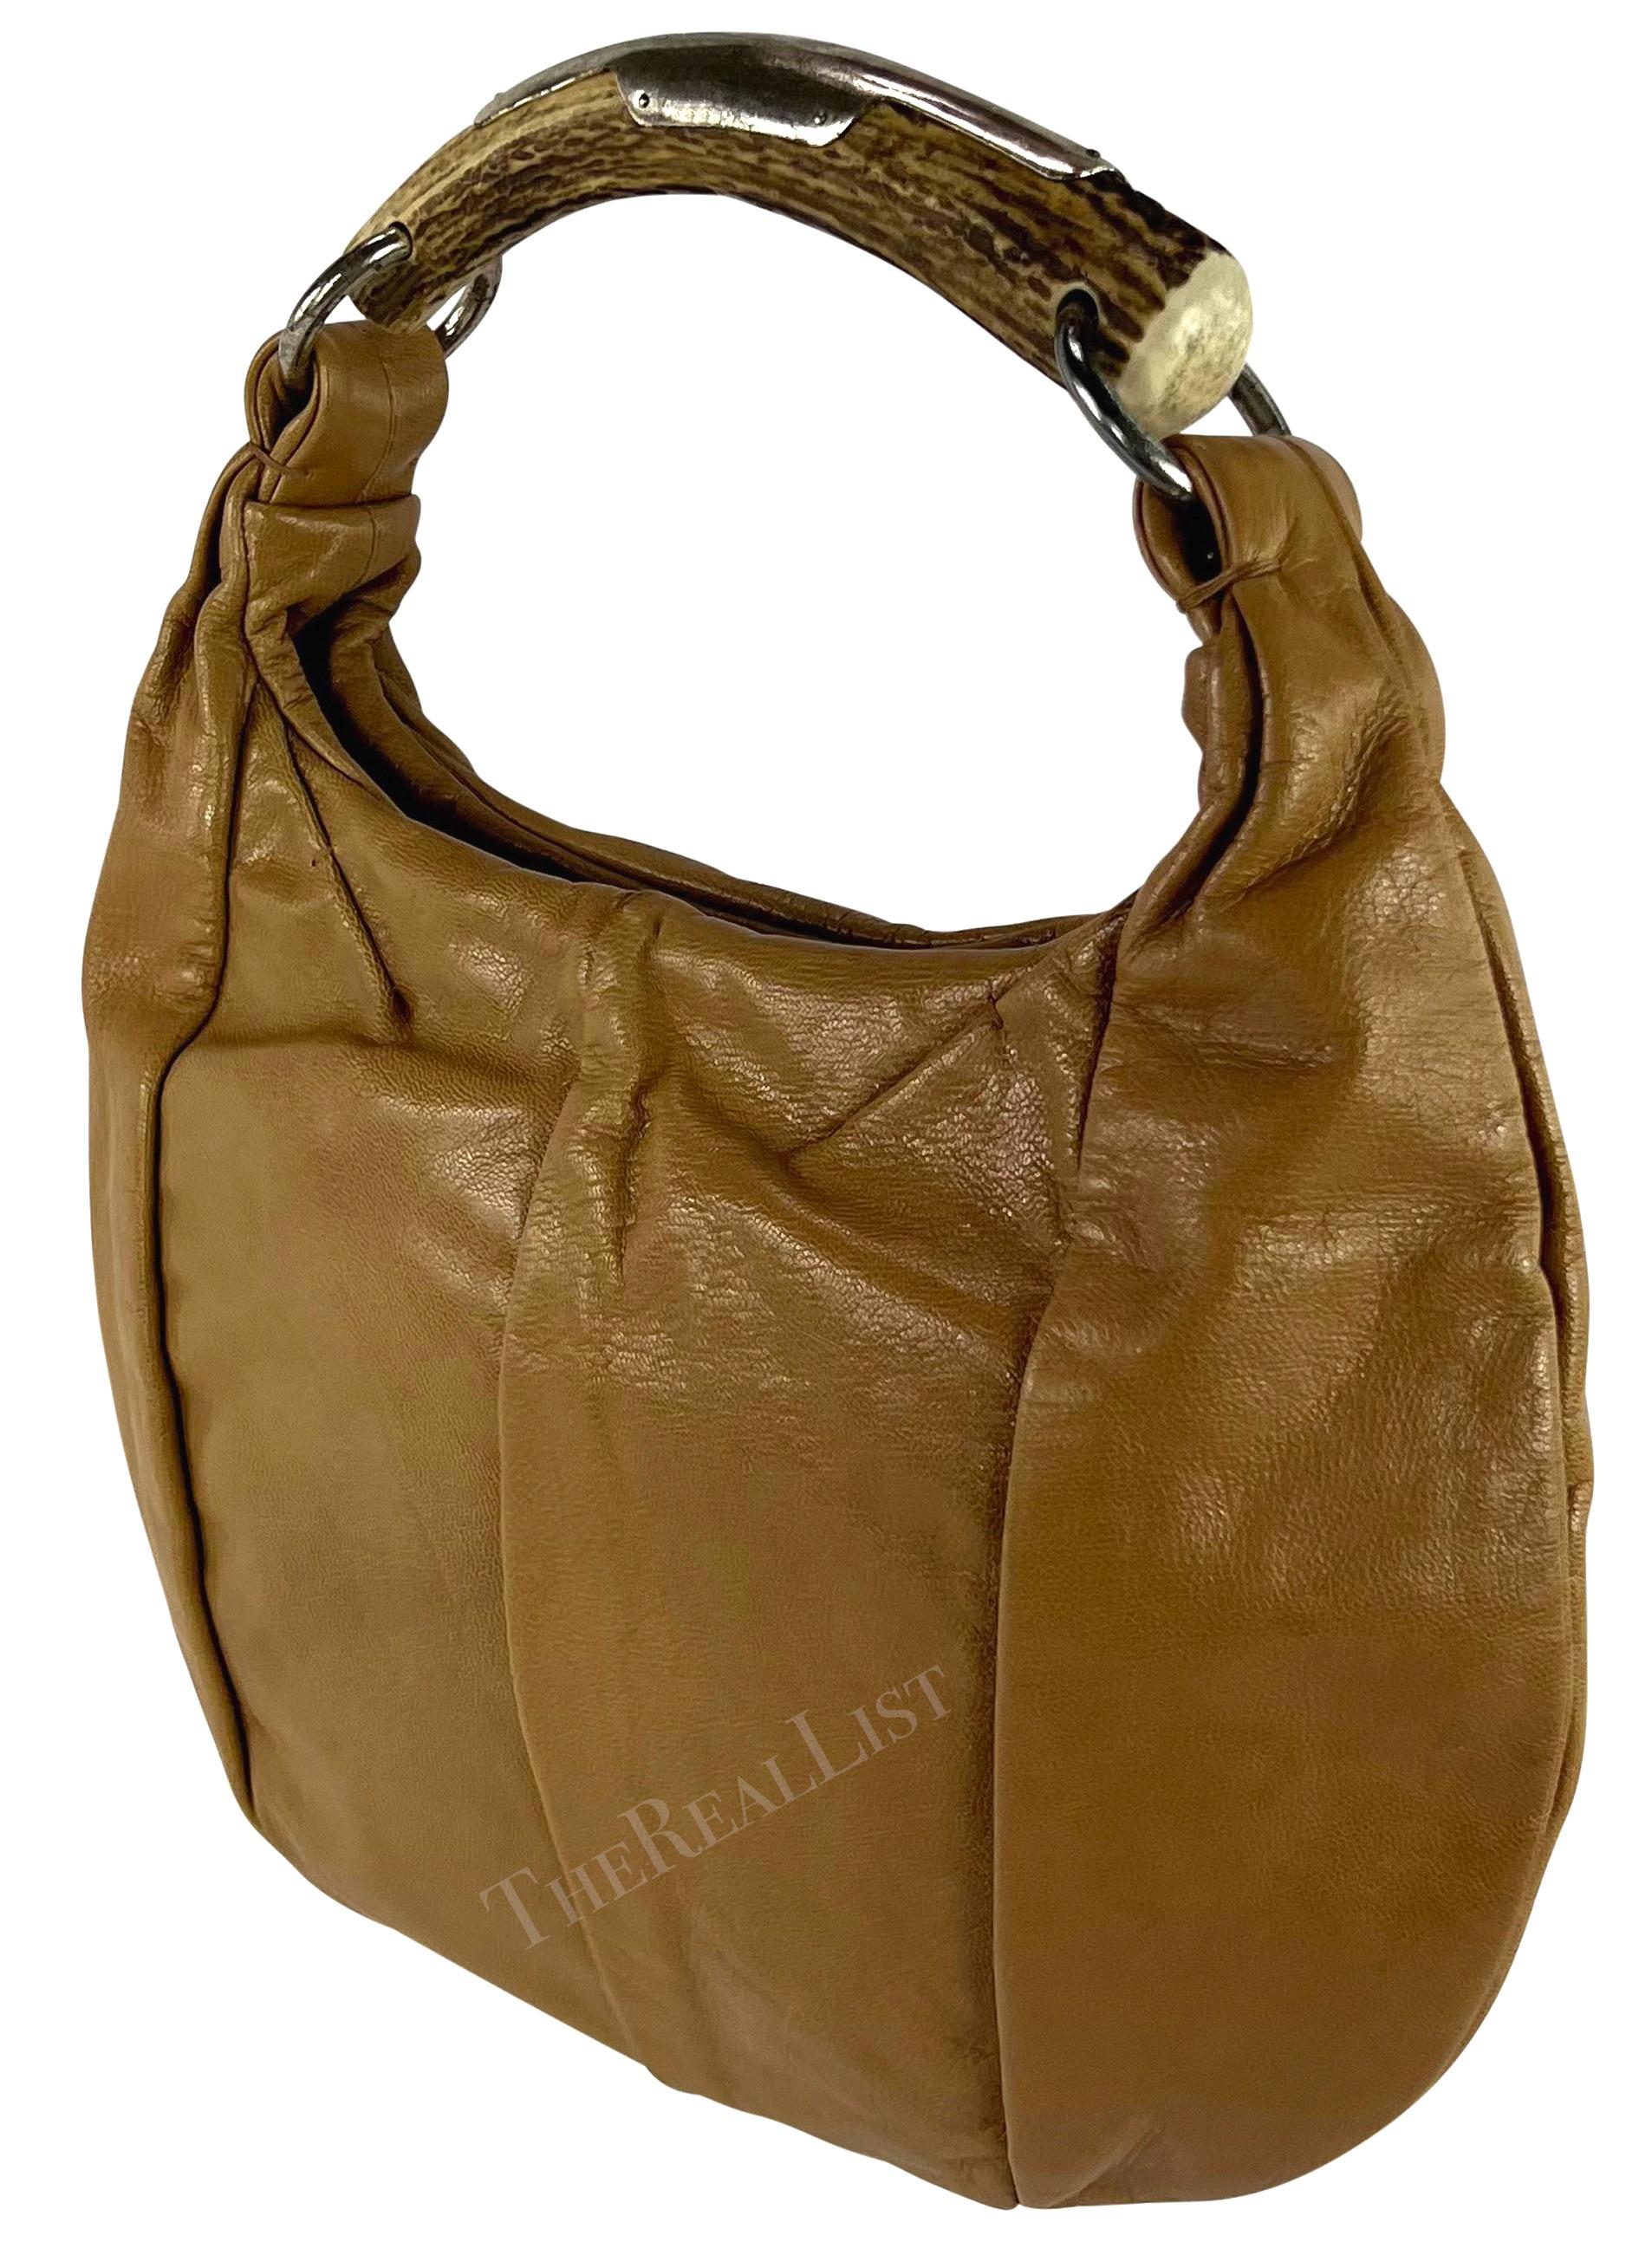 A chic light brown leather Yves Saint Laurent Mombassa bag from the early 2000s, designed by Tom Ford. Crafted from shiny tan aniline leather, this small shoulder bag features a round shape and is made complete with a metal accented horn handle.